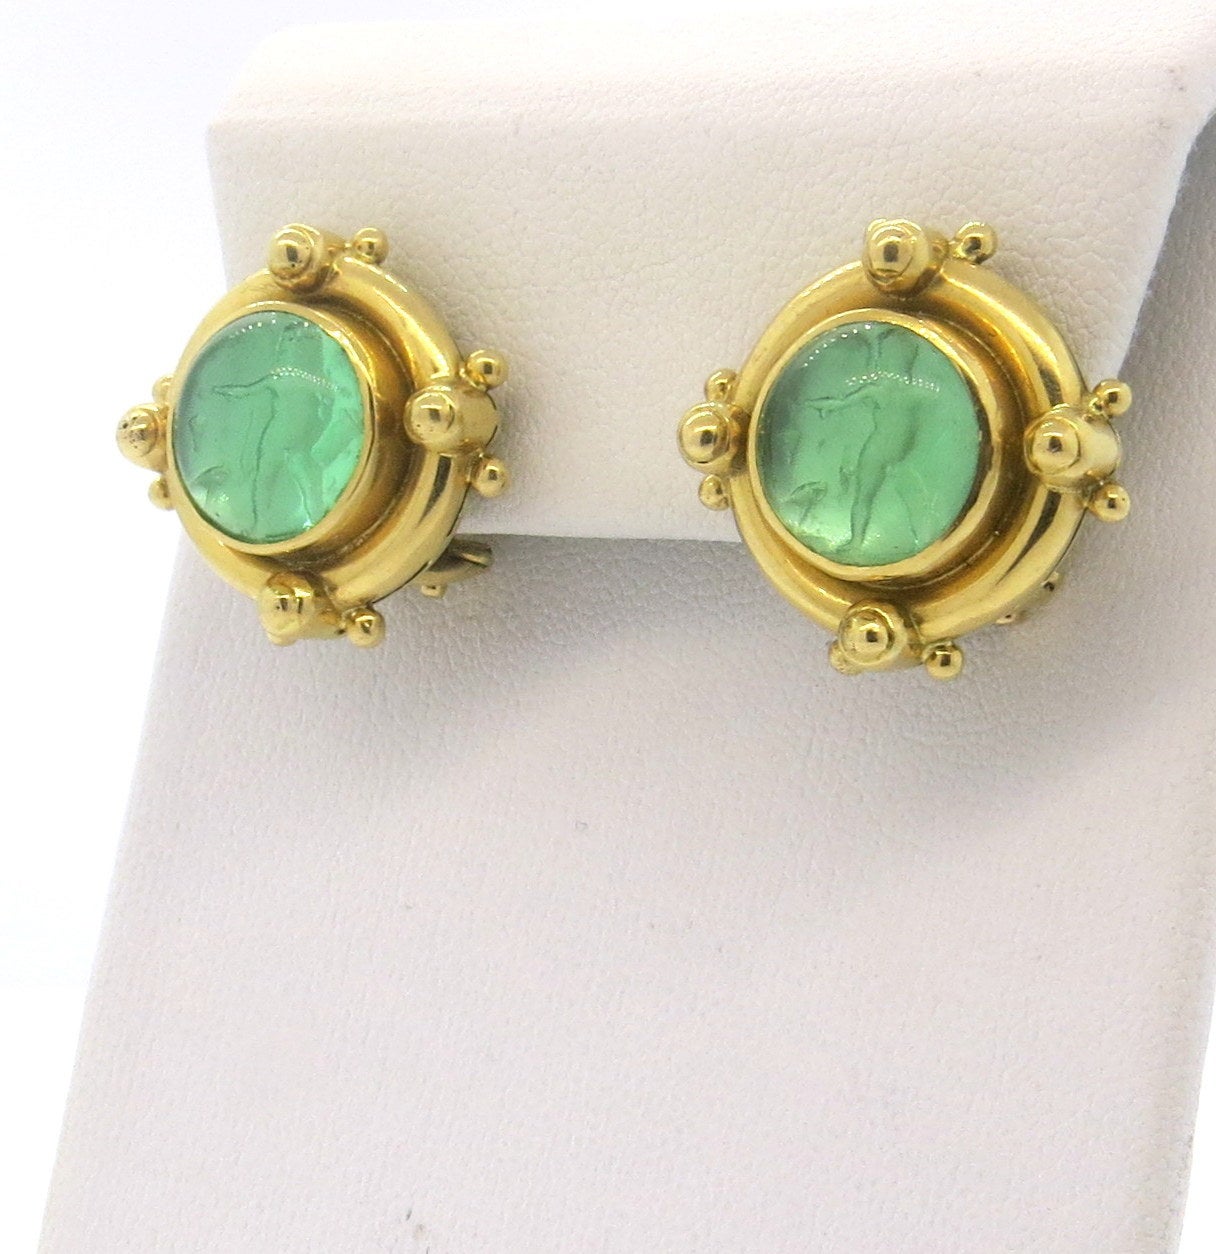 18k gold earrings, by Elizabeth Locke, featuring mother of pearl, covered with green Venetian glass. Earrings are 20mm x 20mm, with collapsible posts. Marked with Locke hallmark and 18k. Weight - 15.2 grams